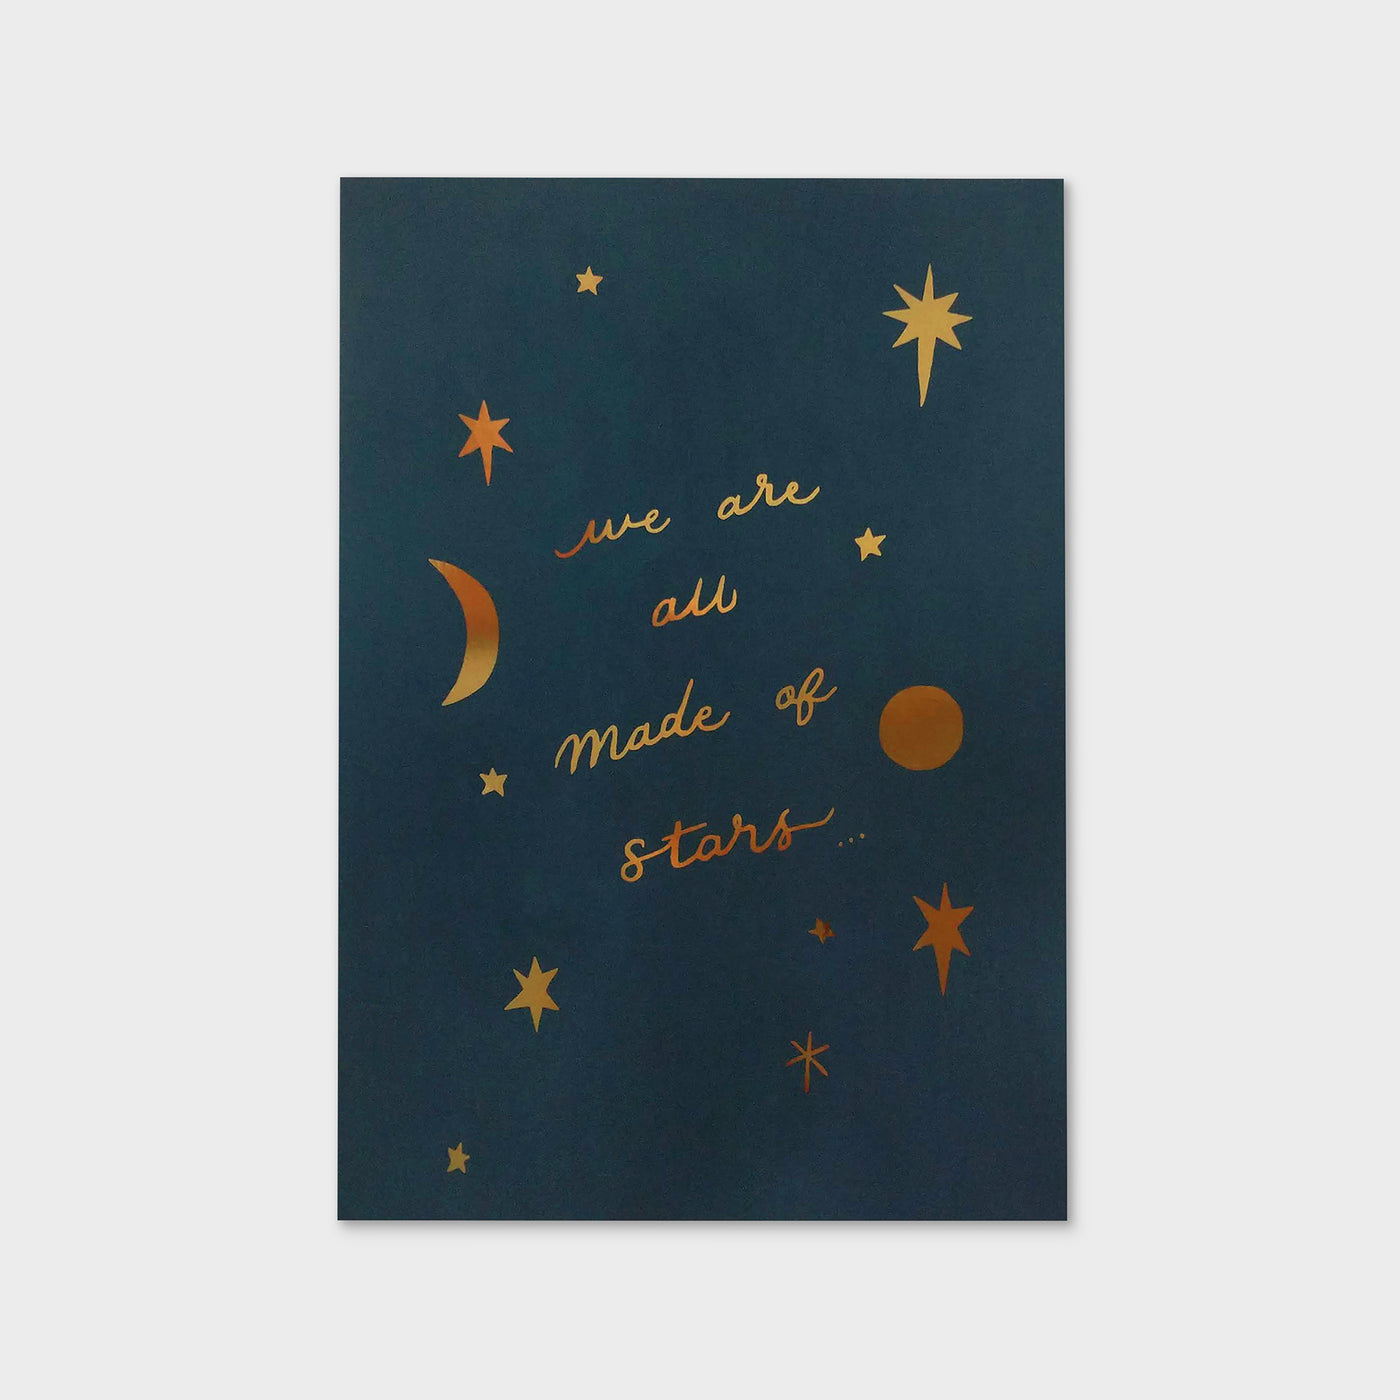 made of stars gold foil print